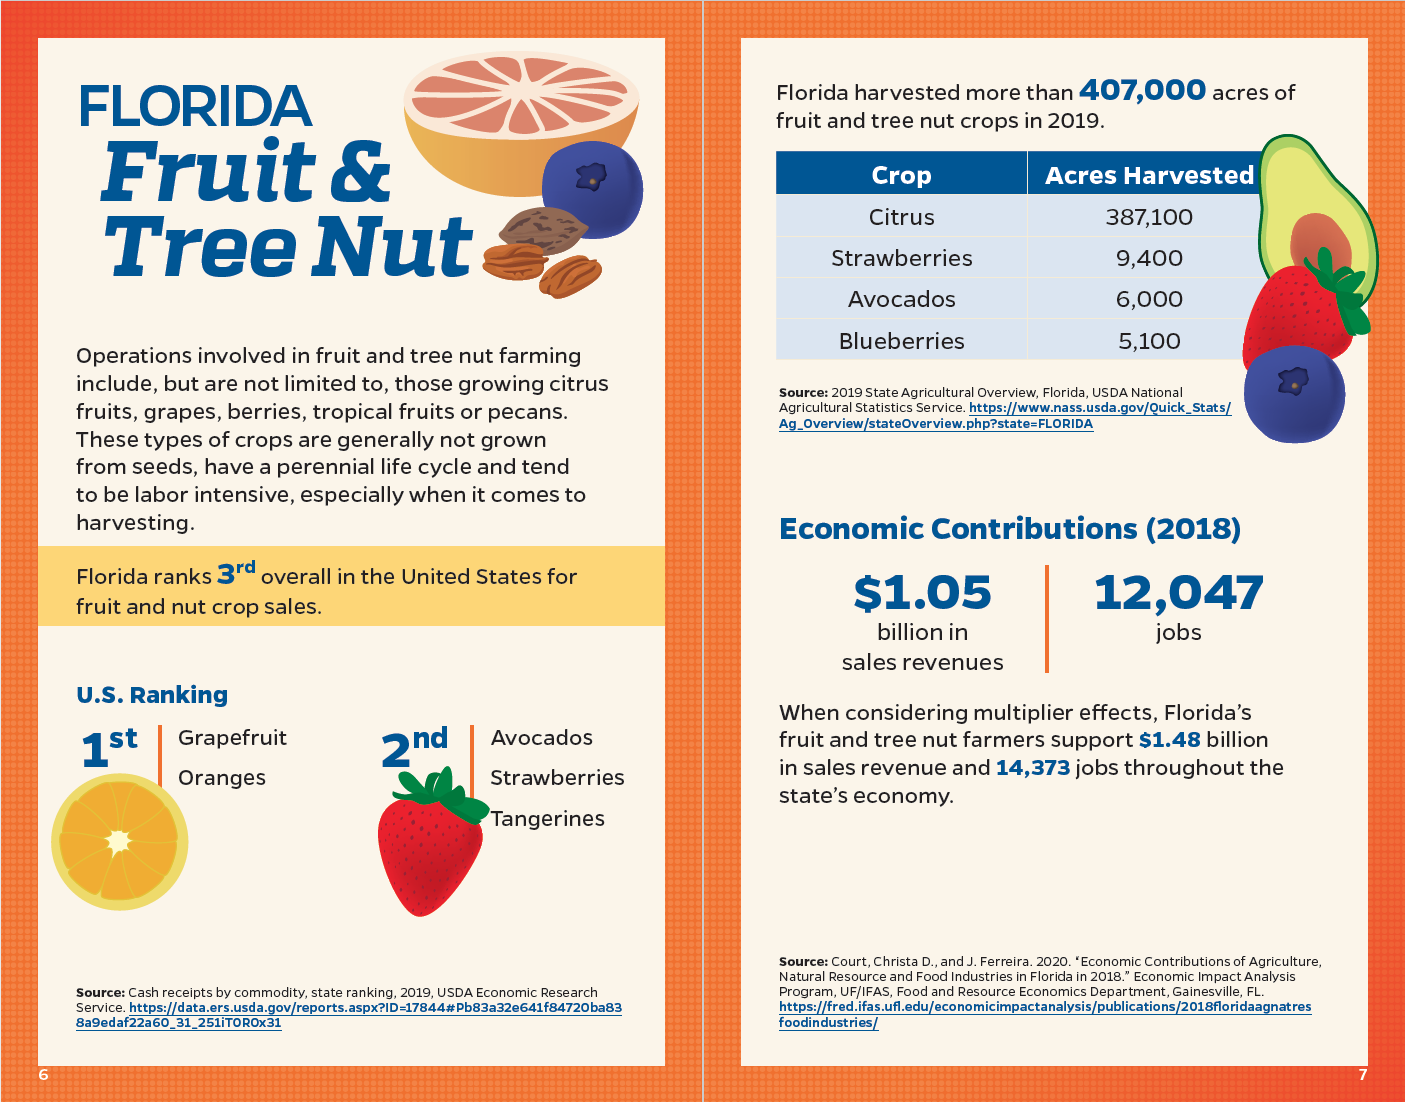 Sample of a page spread found inside the Florida Agriculture and Food Systems Fast Facts booklet.